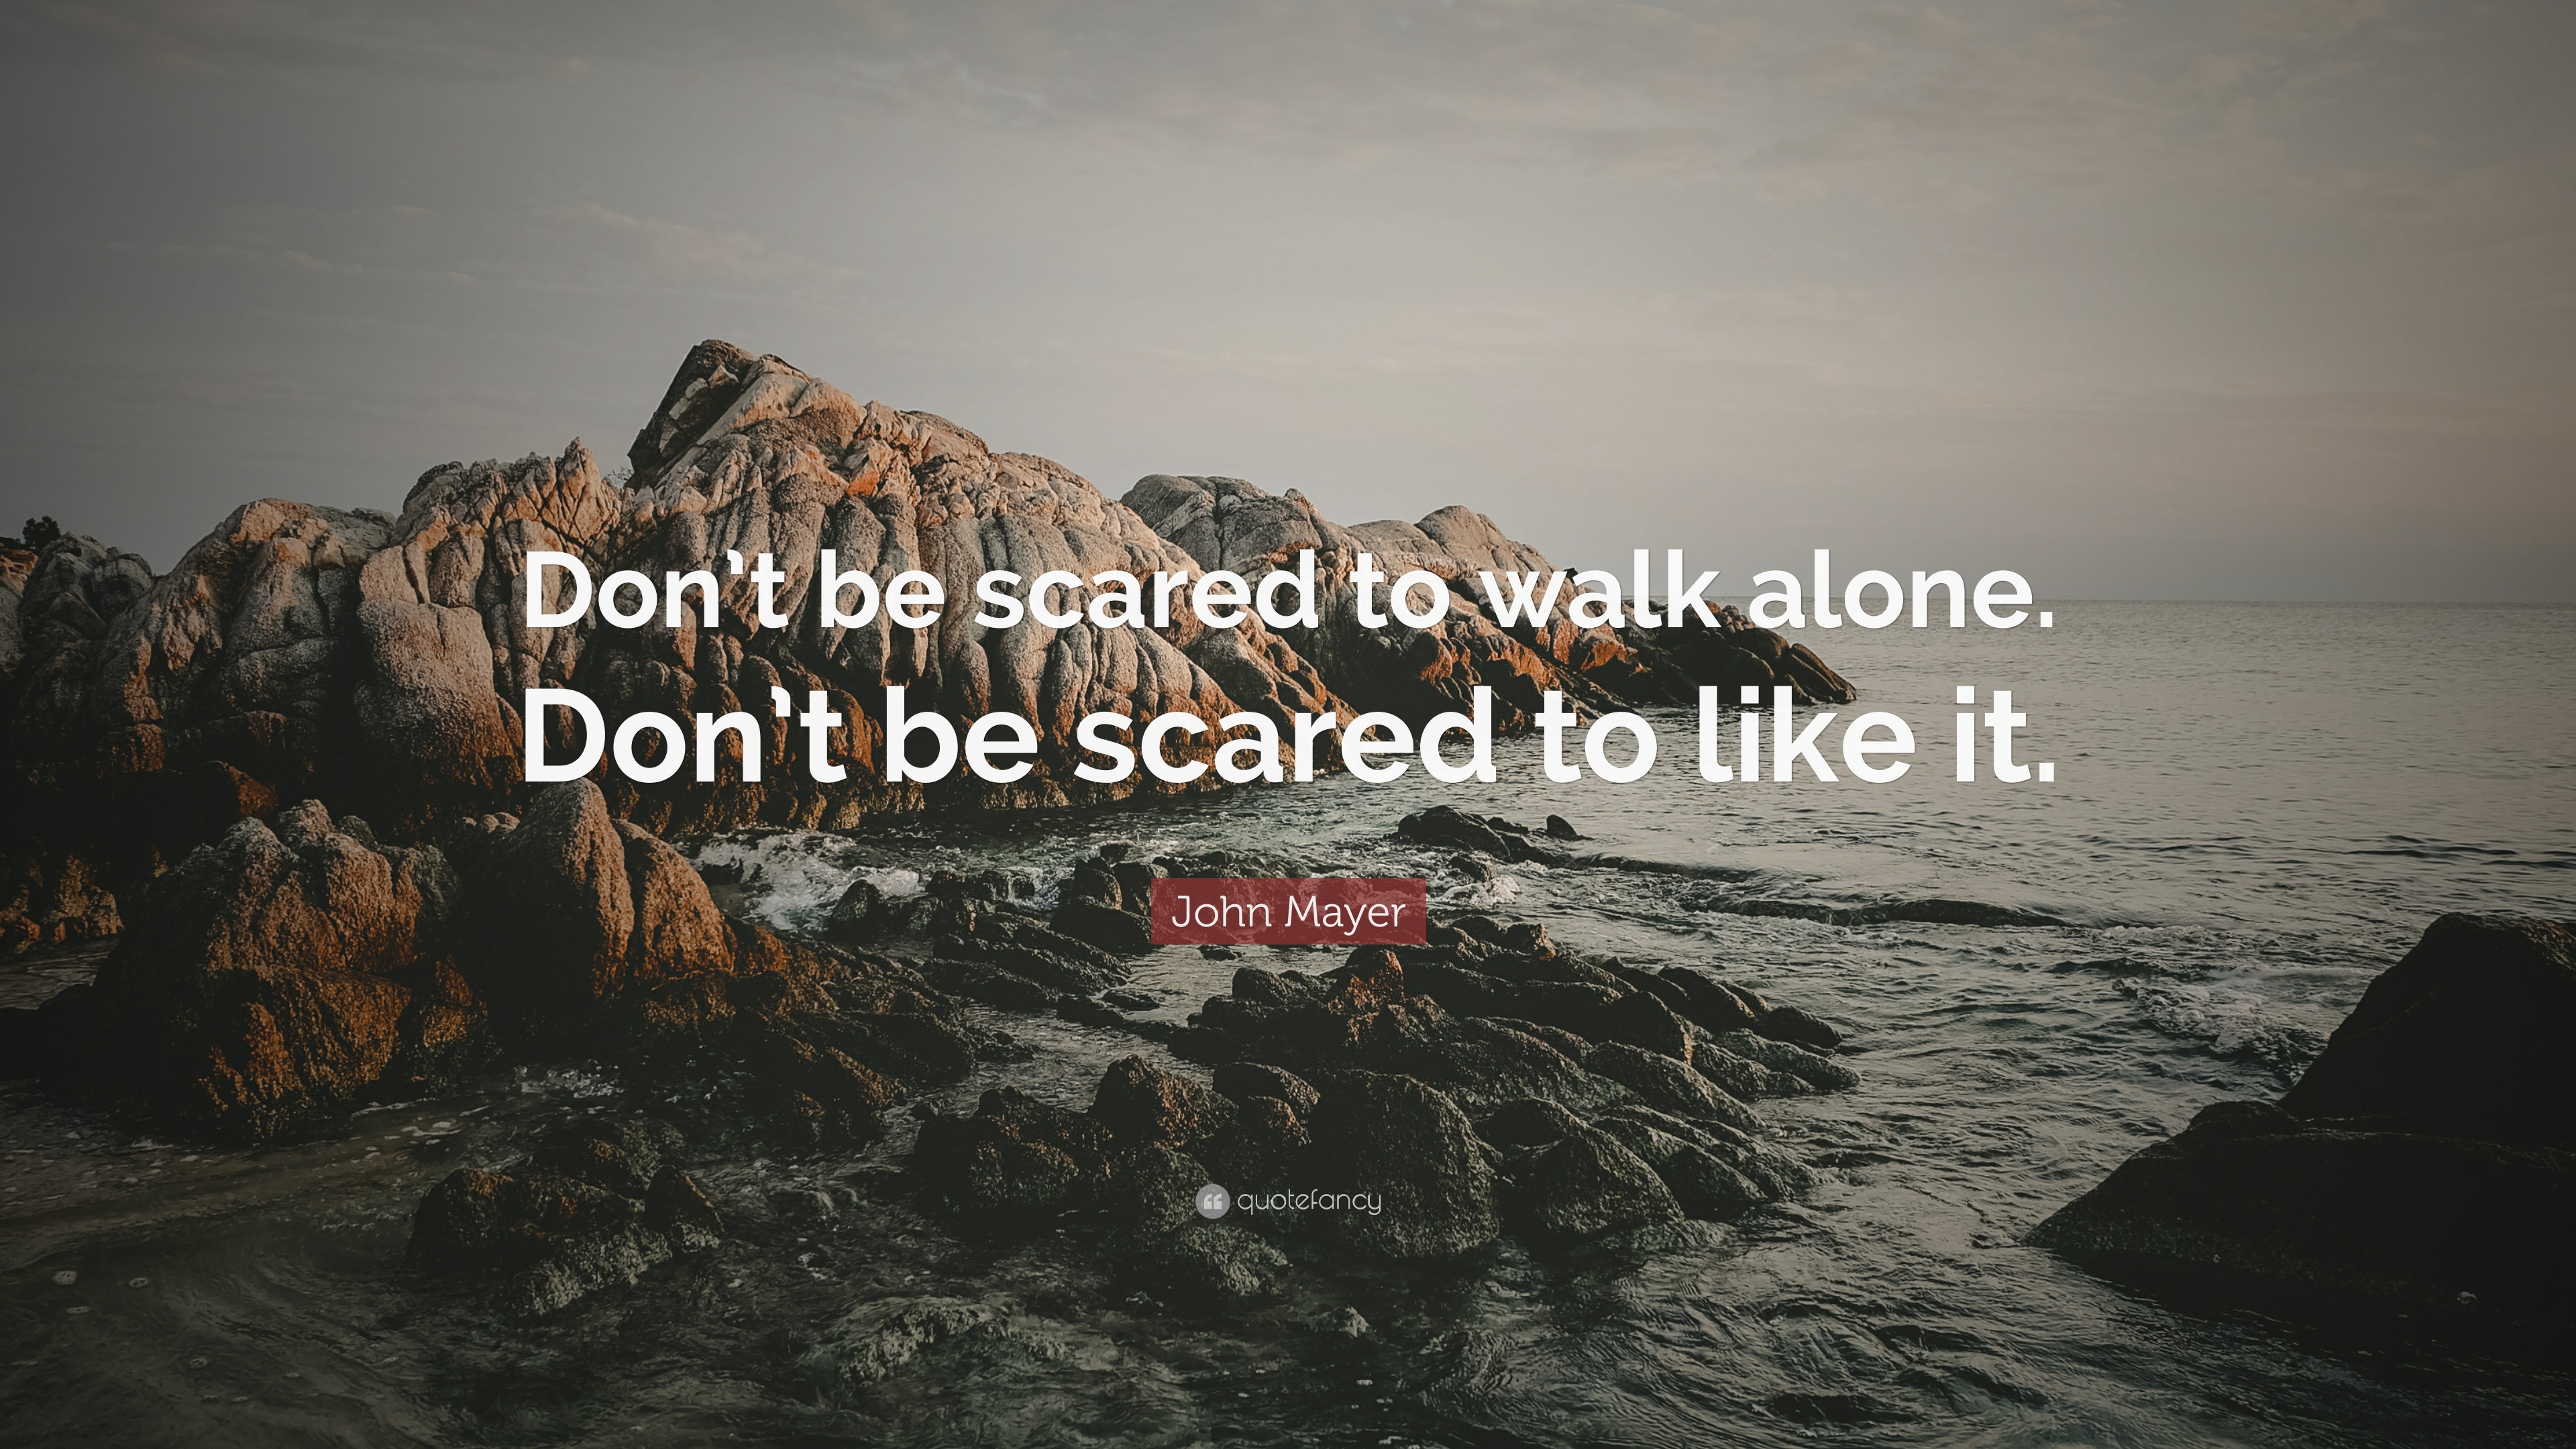 https://quotefancy.com/media/wallpaper/3840x2160/4757222-John-Mayer-Quote-Don-t-be-scared-to-walk-alone-Don-t-be-scared-to.jpg